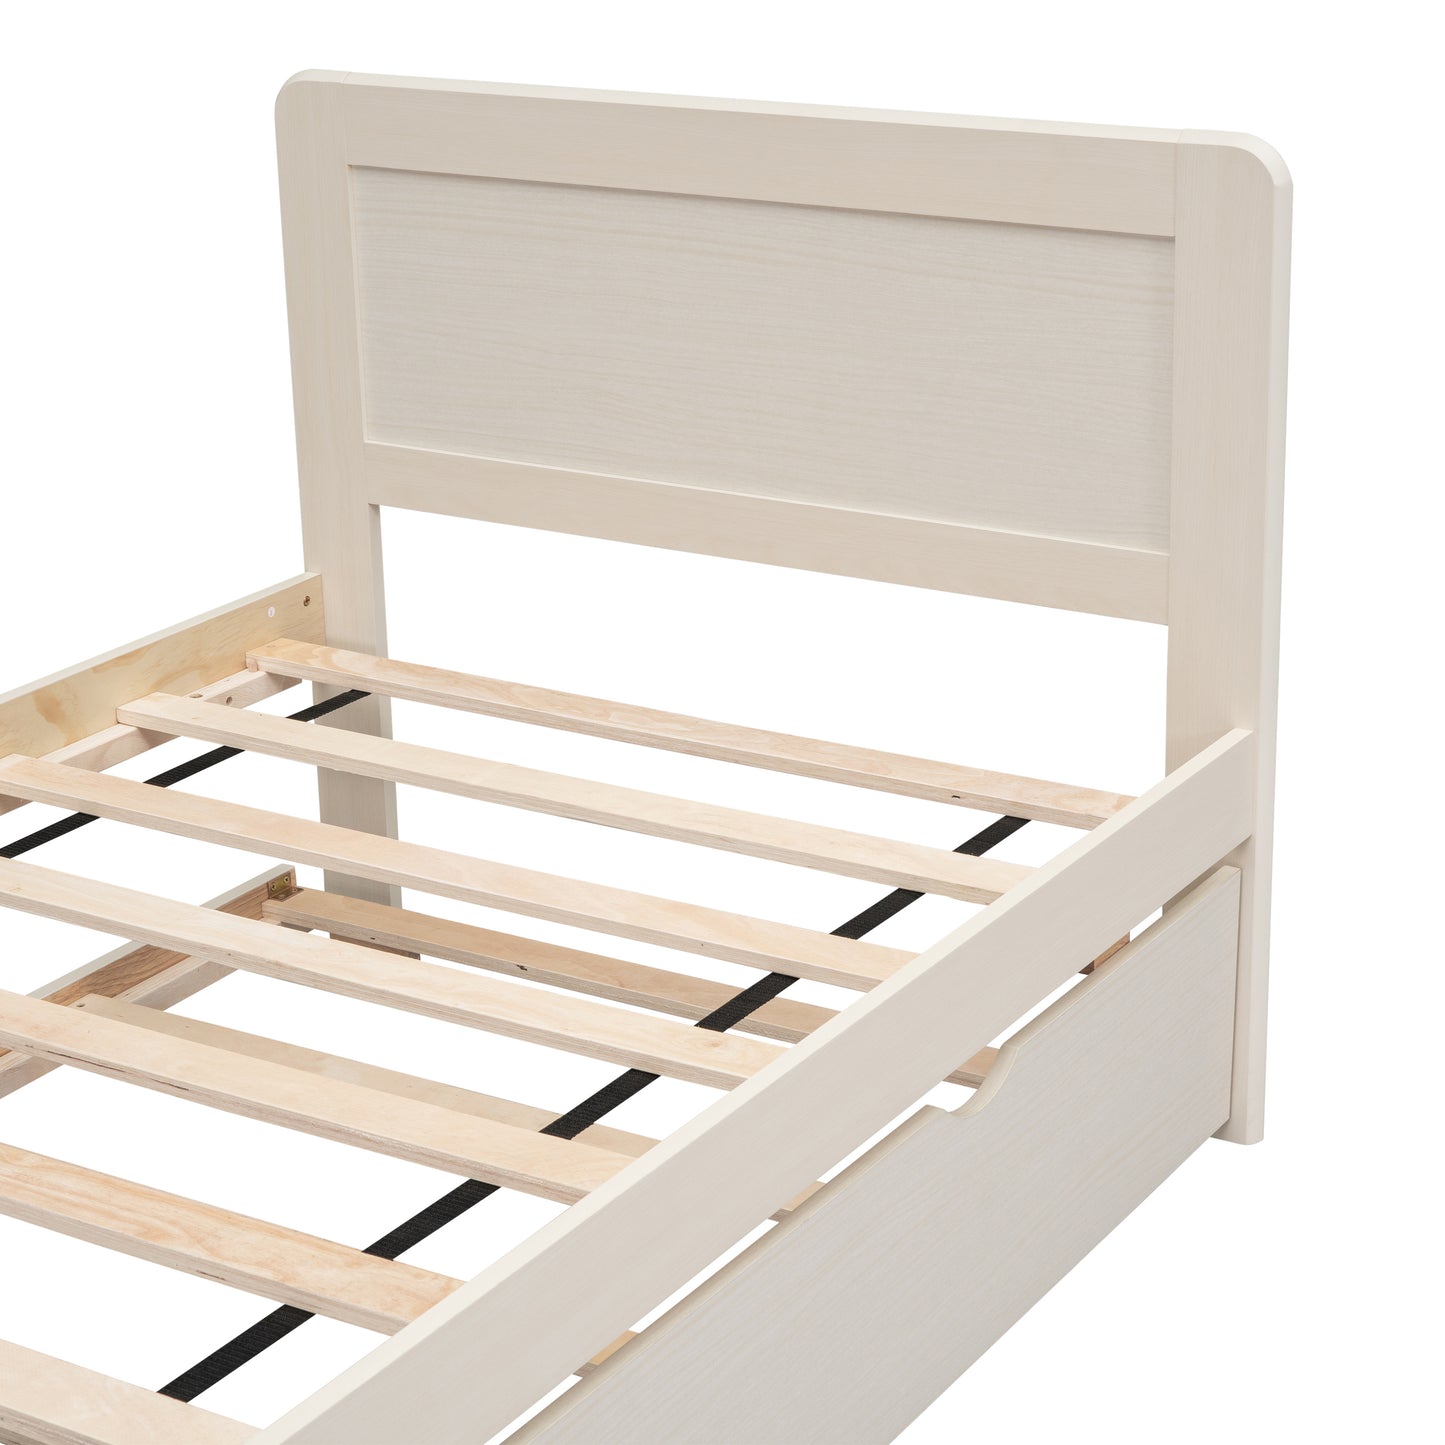 Modern Design Twin Size Platform Bed Frame with Trundle for White Washed Color